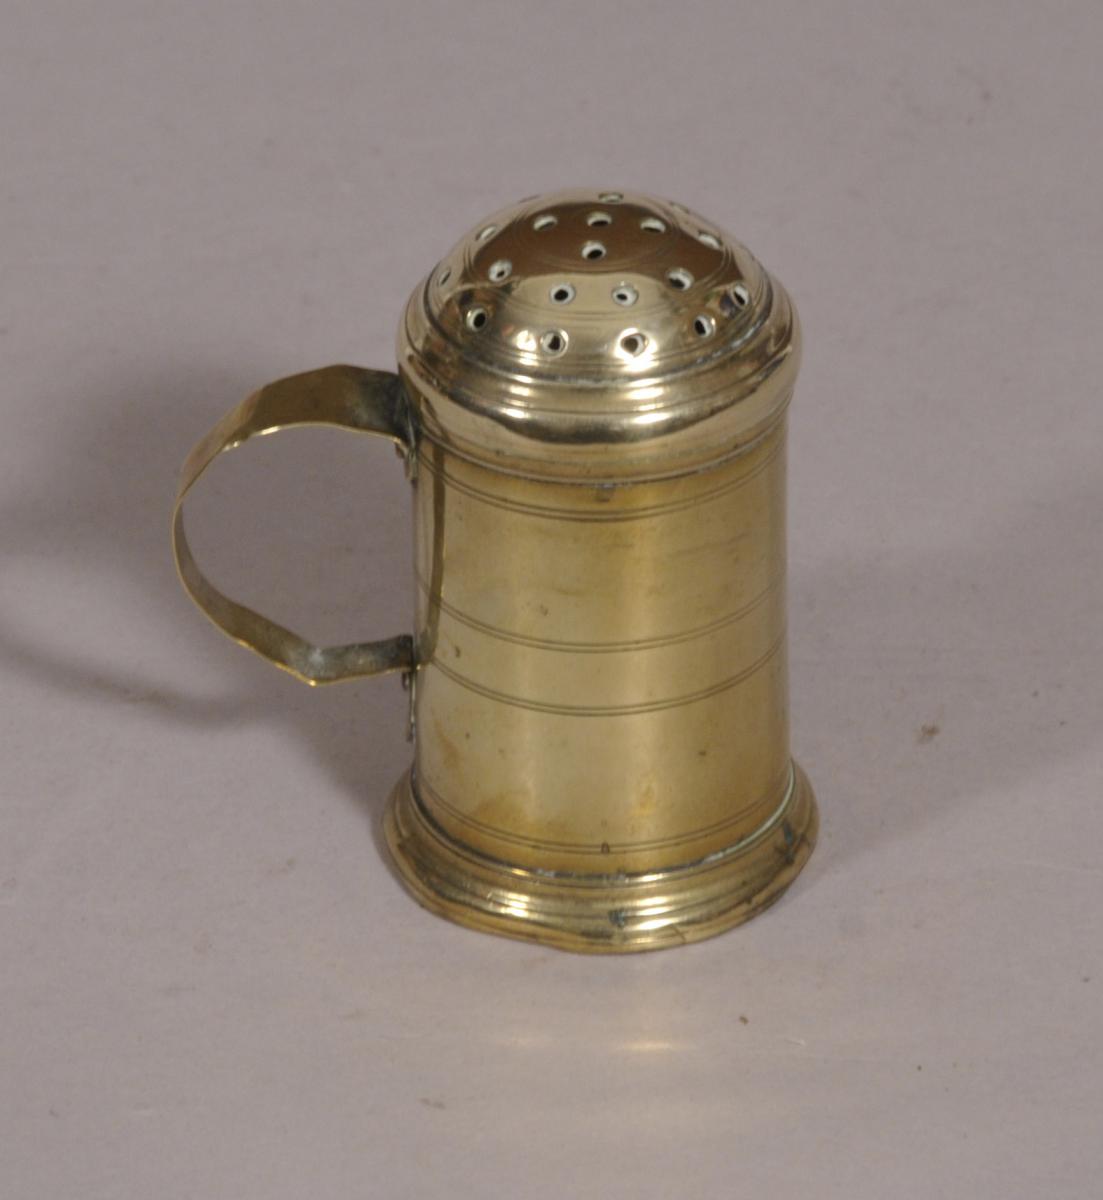 S/4353 Antique Mid 18th Century Brass Spice Dredger of the Georgian Period